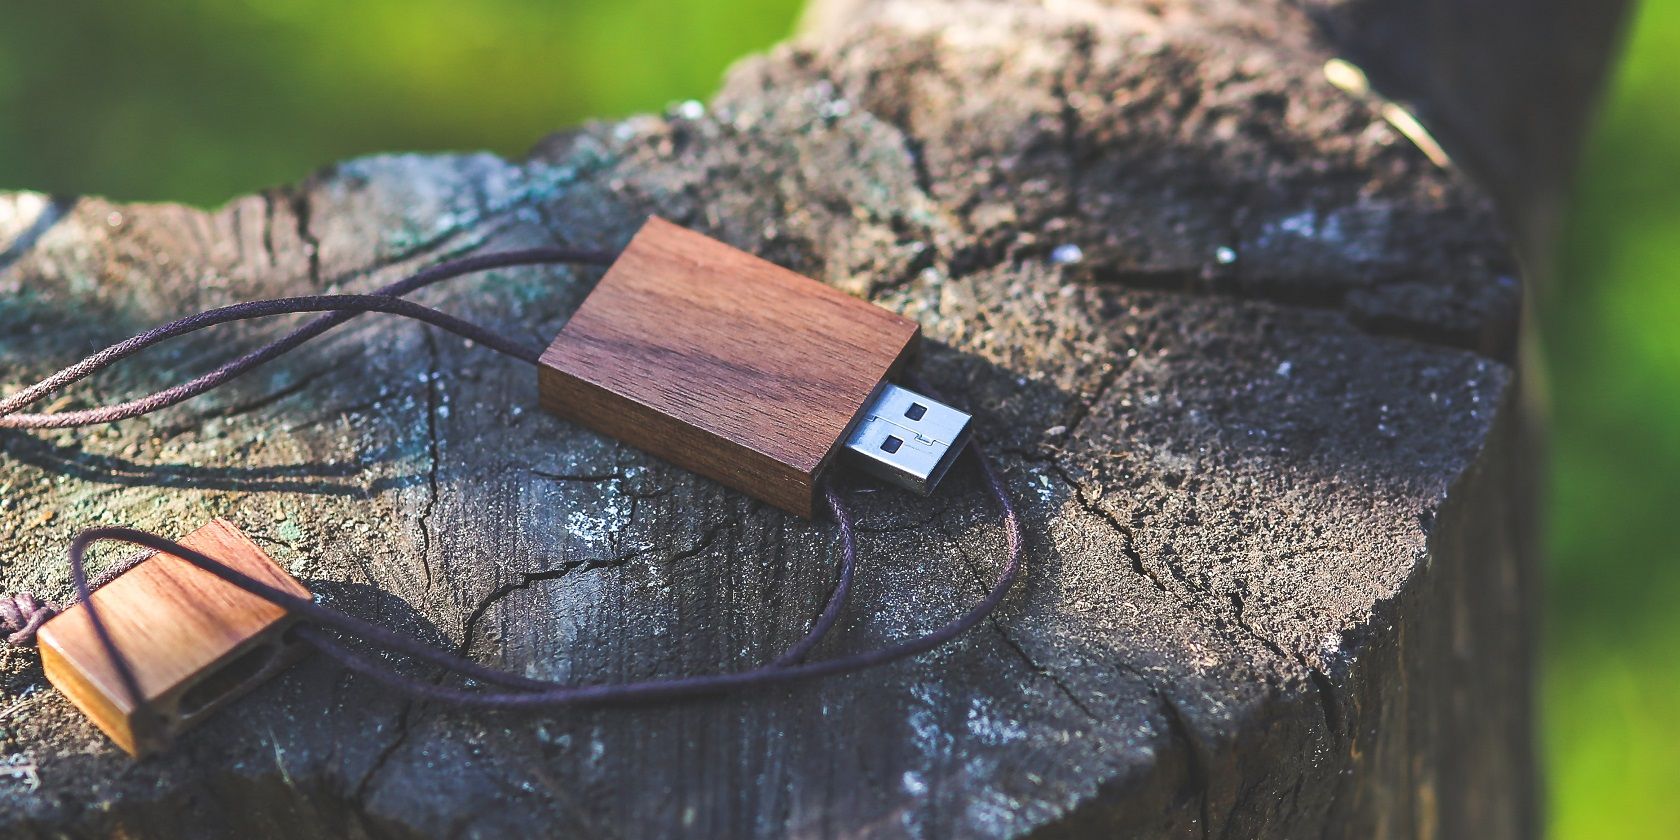 11 Creative and Awesome DIY USB Flash Drives